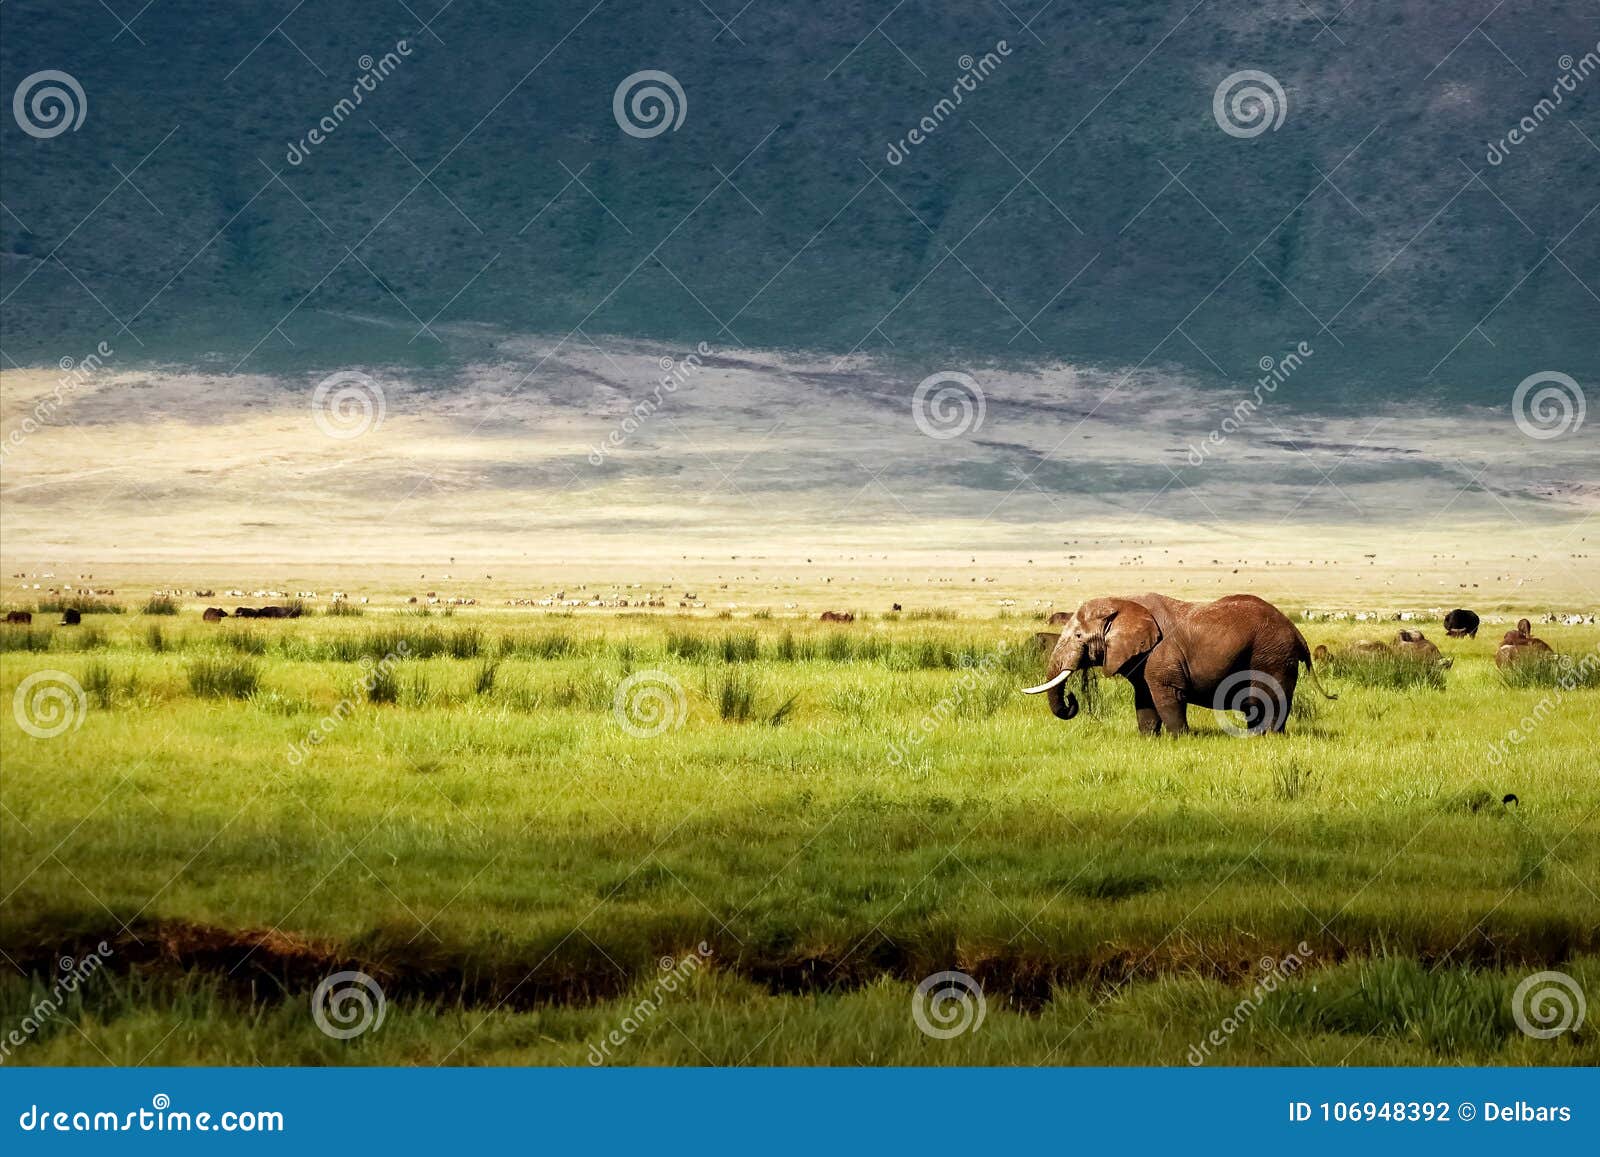 african elephant in the ngorongoro crater in the background of mountains.